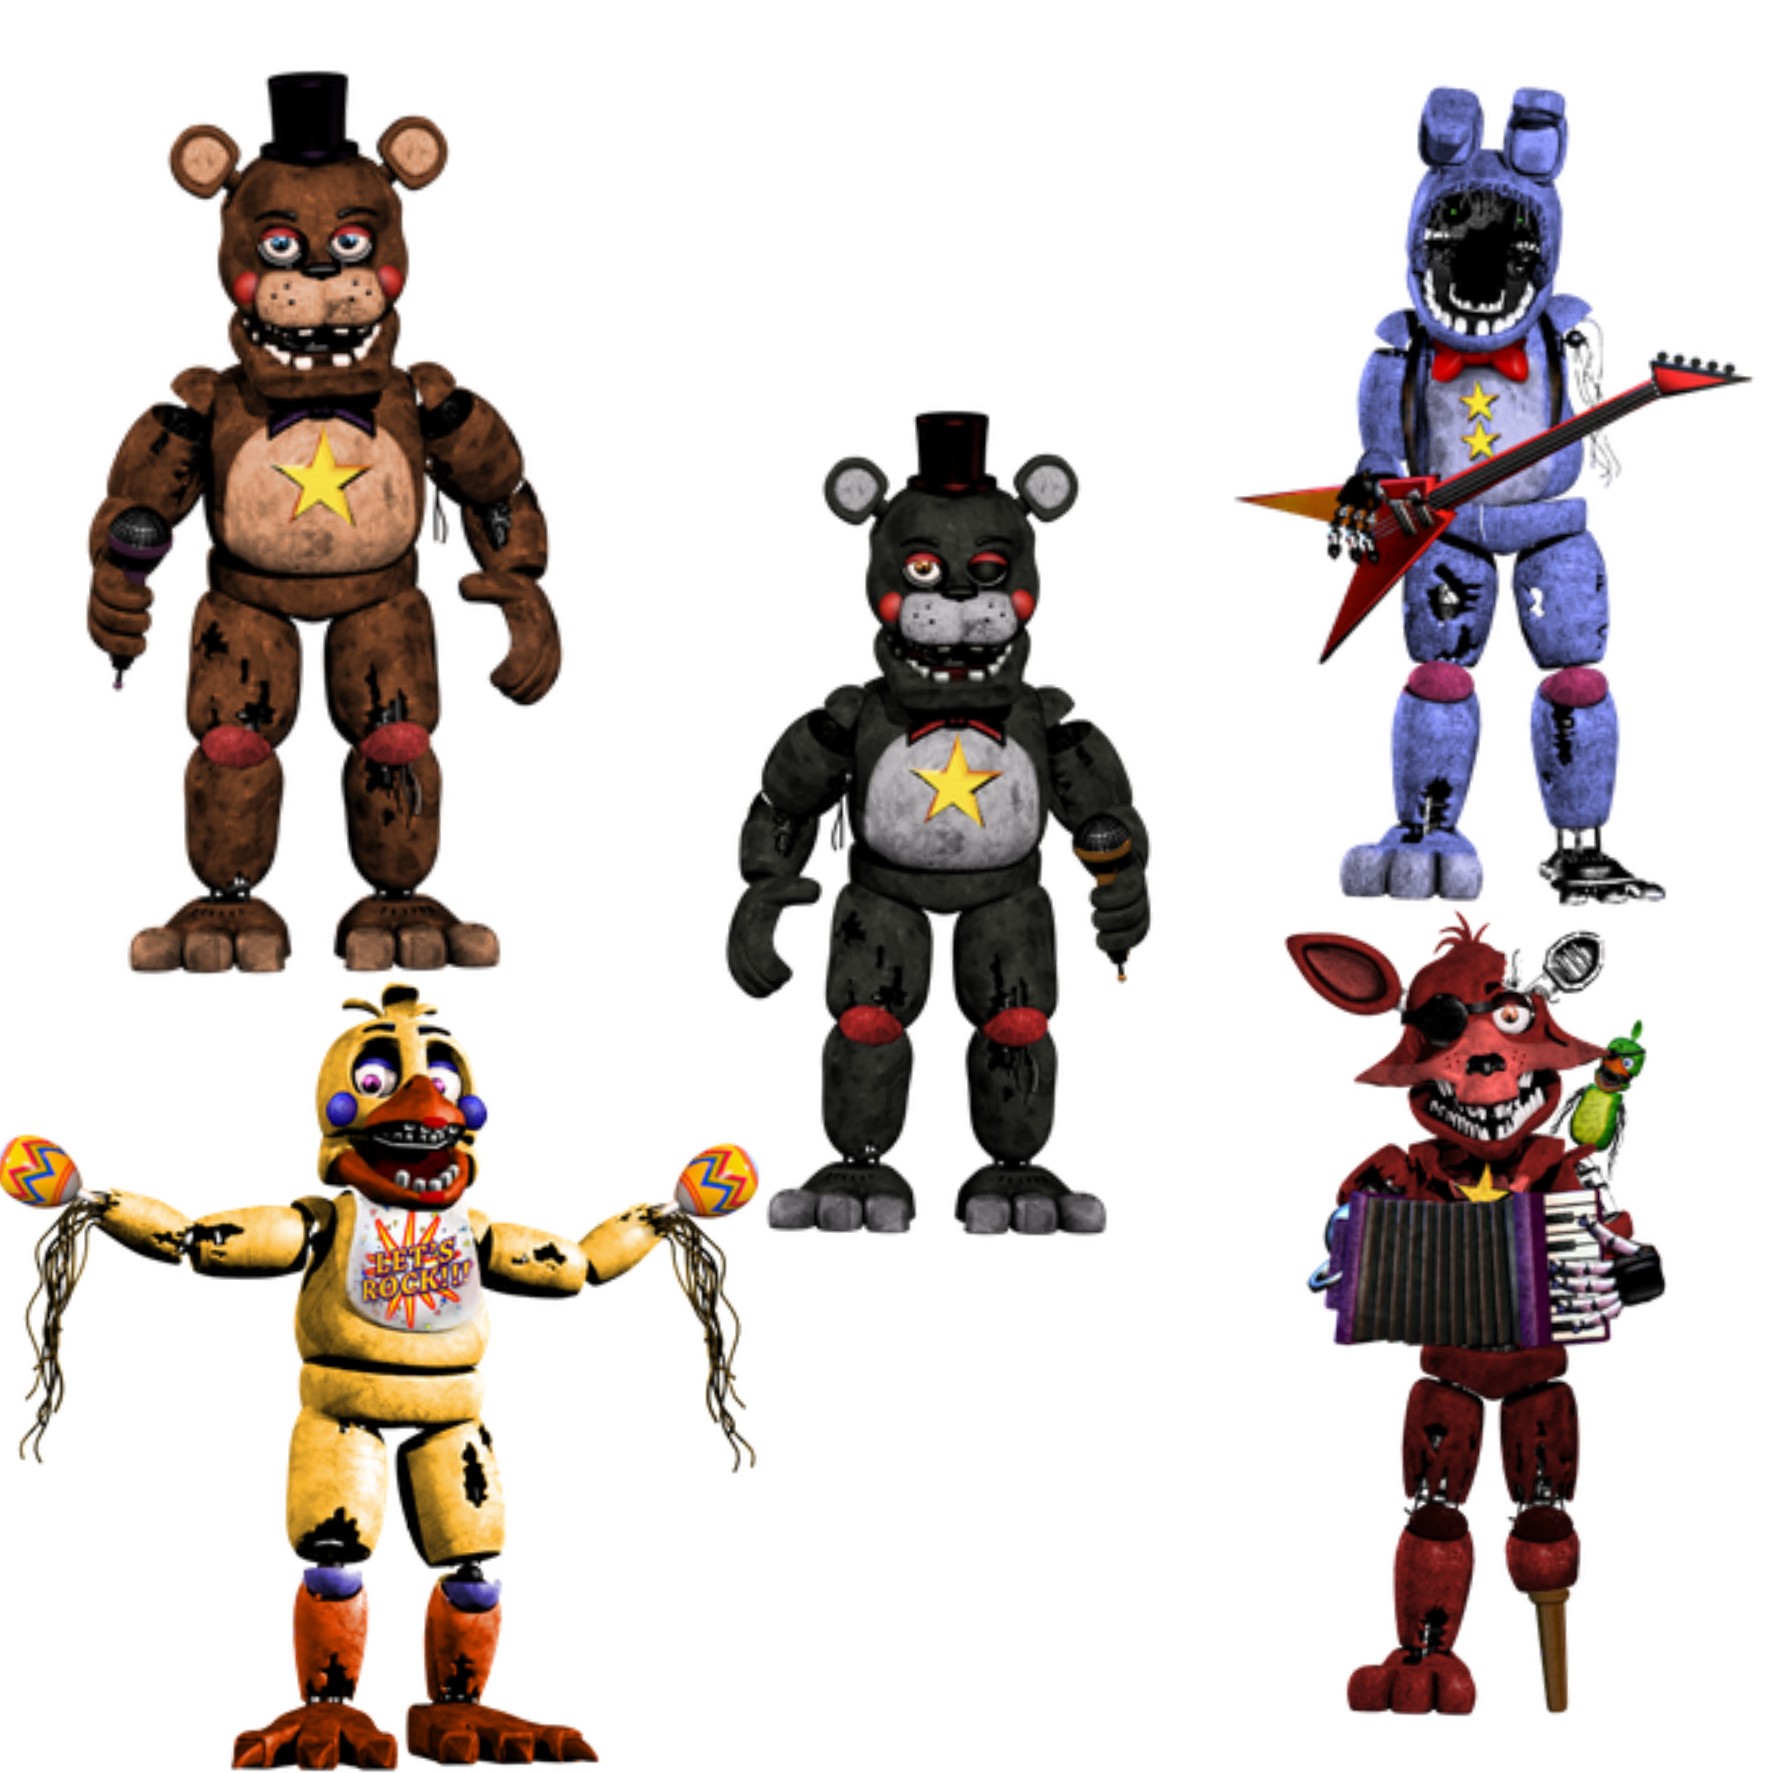 Withered rockstar animatronics 267206736010201 by @munchbs.